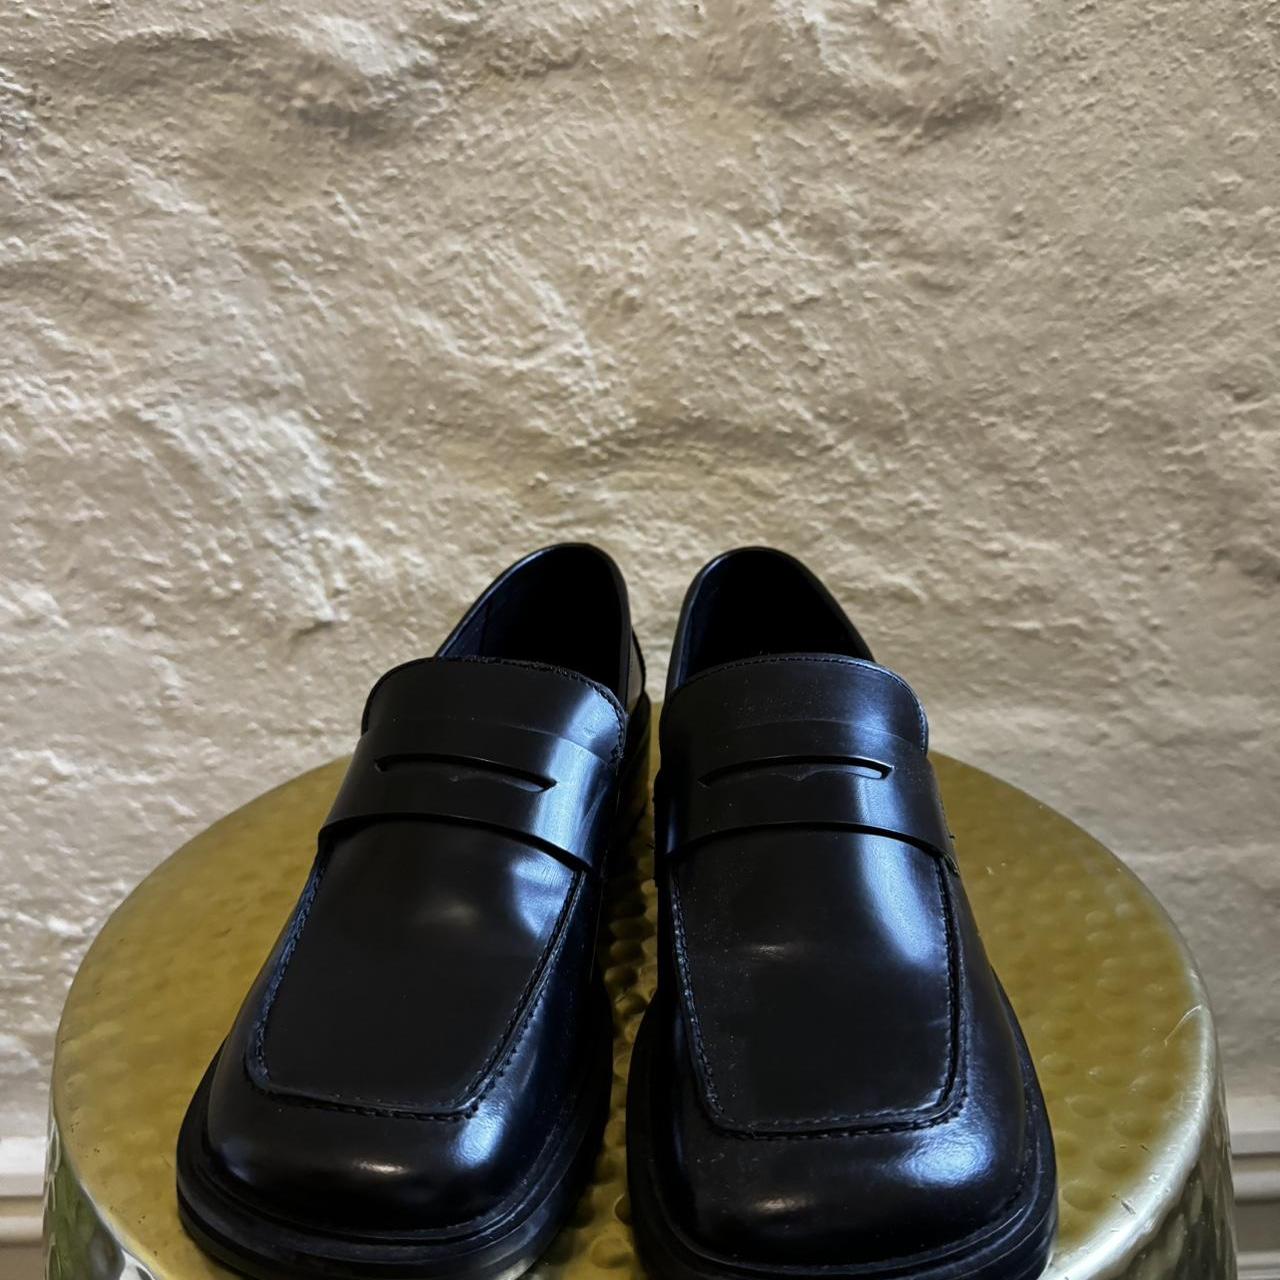 ASOS loafers. Bought wrong size and forgot to return! - Depop